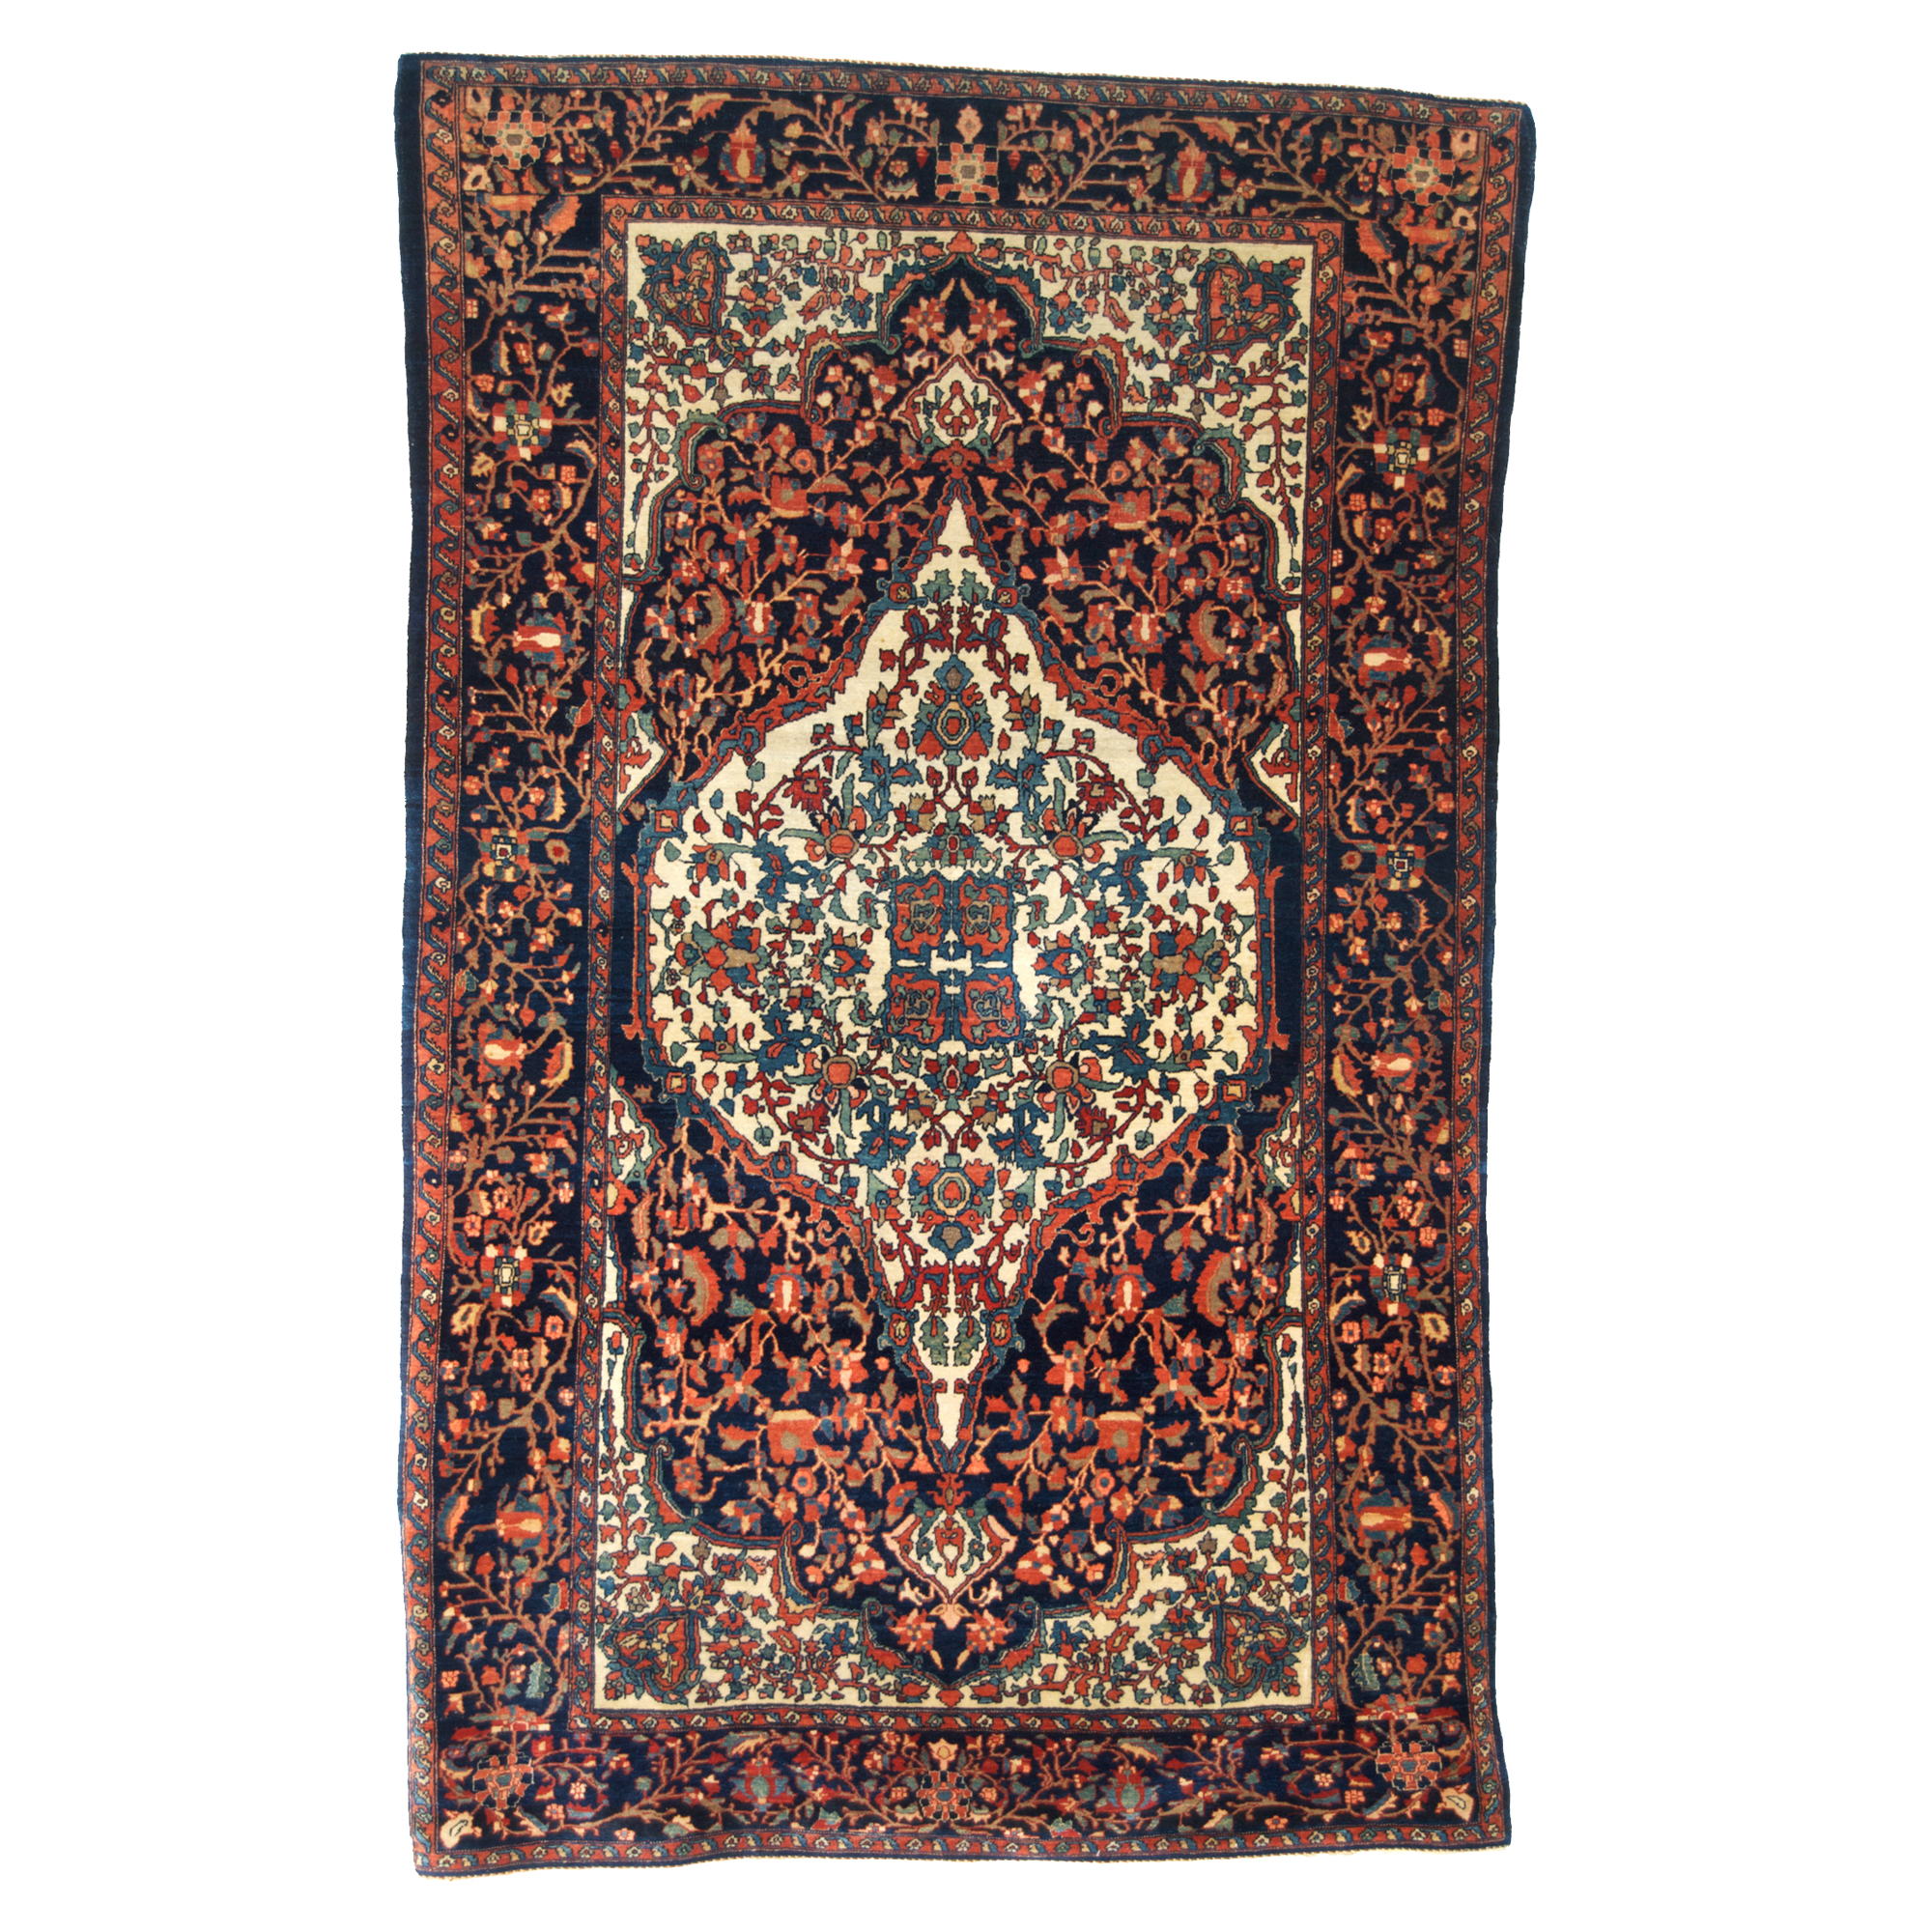 Douglas Stock Gallery Antique Oriental Rug Research Archives are an excellent source of information on 19th century Persian rugs - Antique Persian Fereghan Sarouk rug with an ivory medallion on a navy blue field